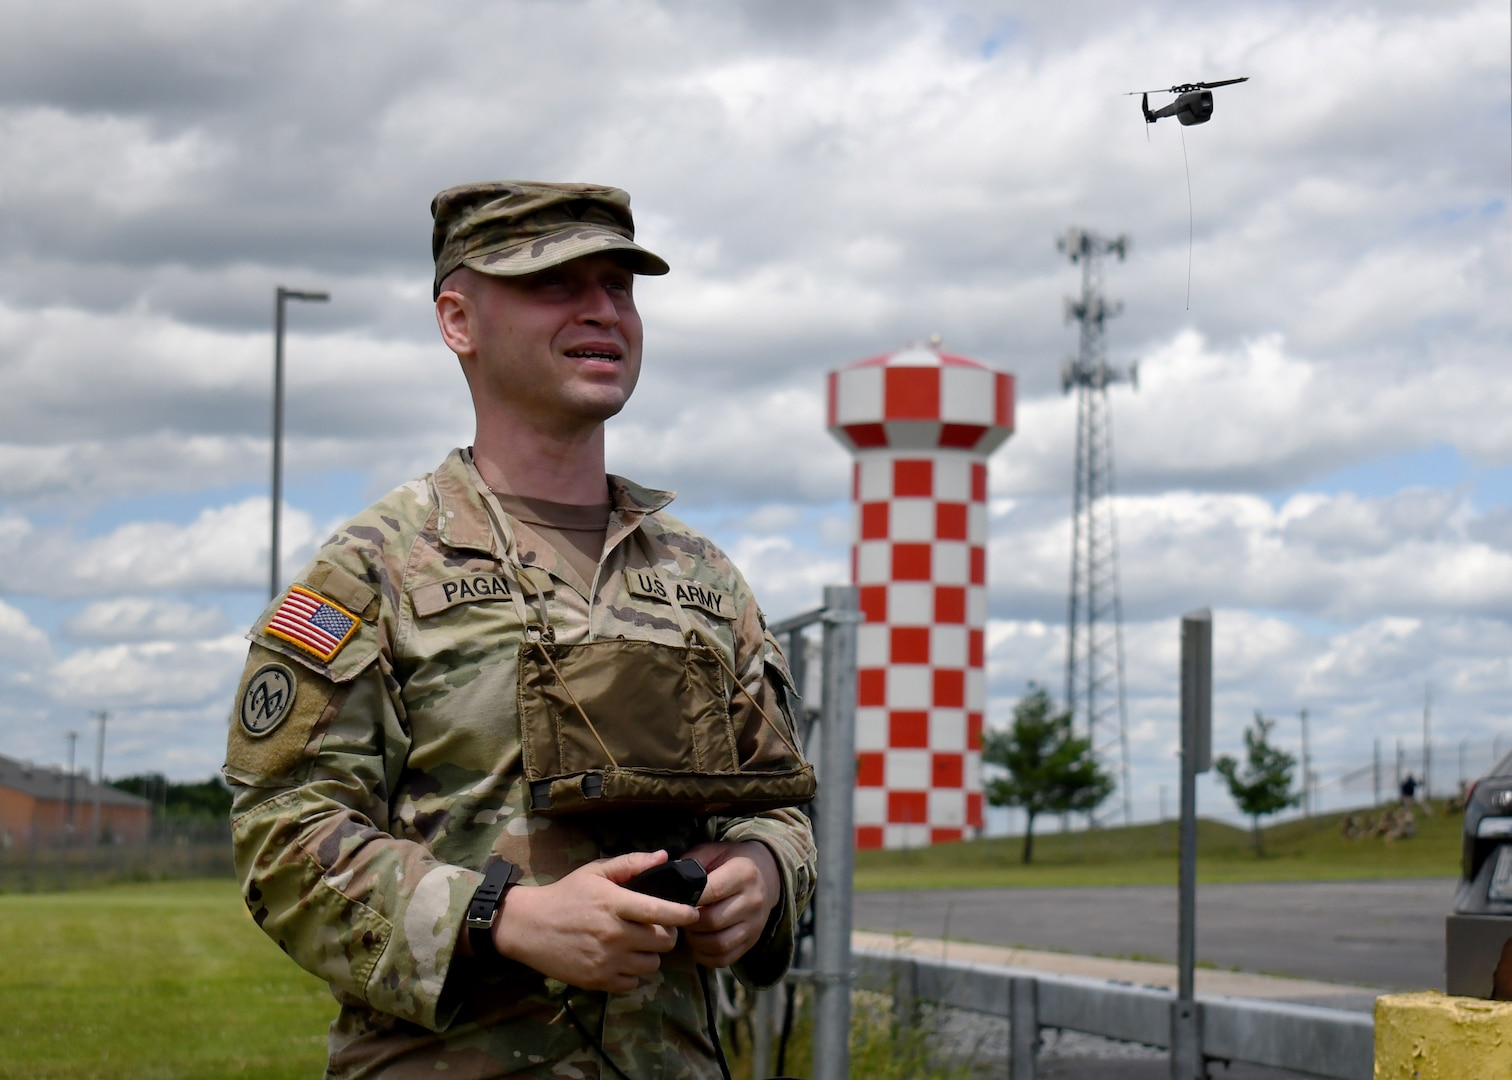 U.S. Army Spc. Johnny Pagan, an infantryman with the New York National Guard's 1st Battalion, 69th Infantry Regiment, controls a soldier-borne sensor unmanned aerial vehicle in Fort Drum, N.Y., June 27, 2024. The system is portable and can be controlled by a single Soldier, allowing the drone to complete dangerous work Soldiers usually perform.